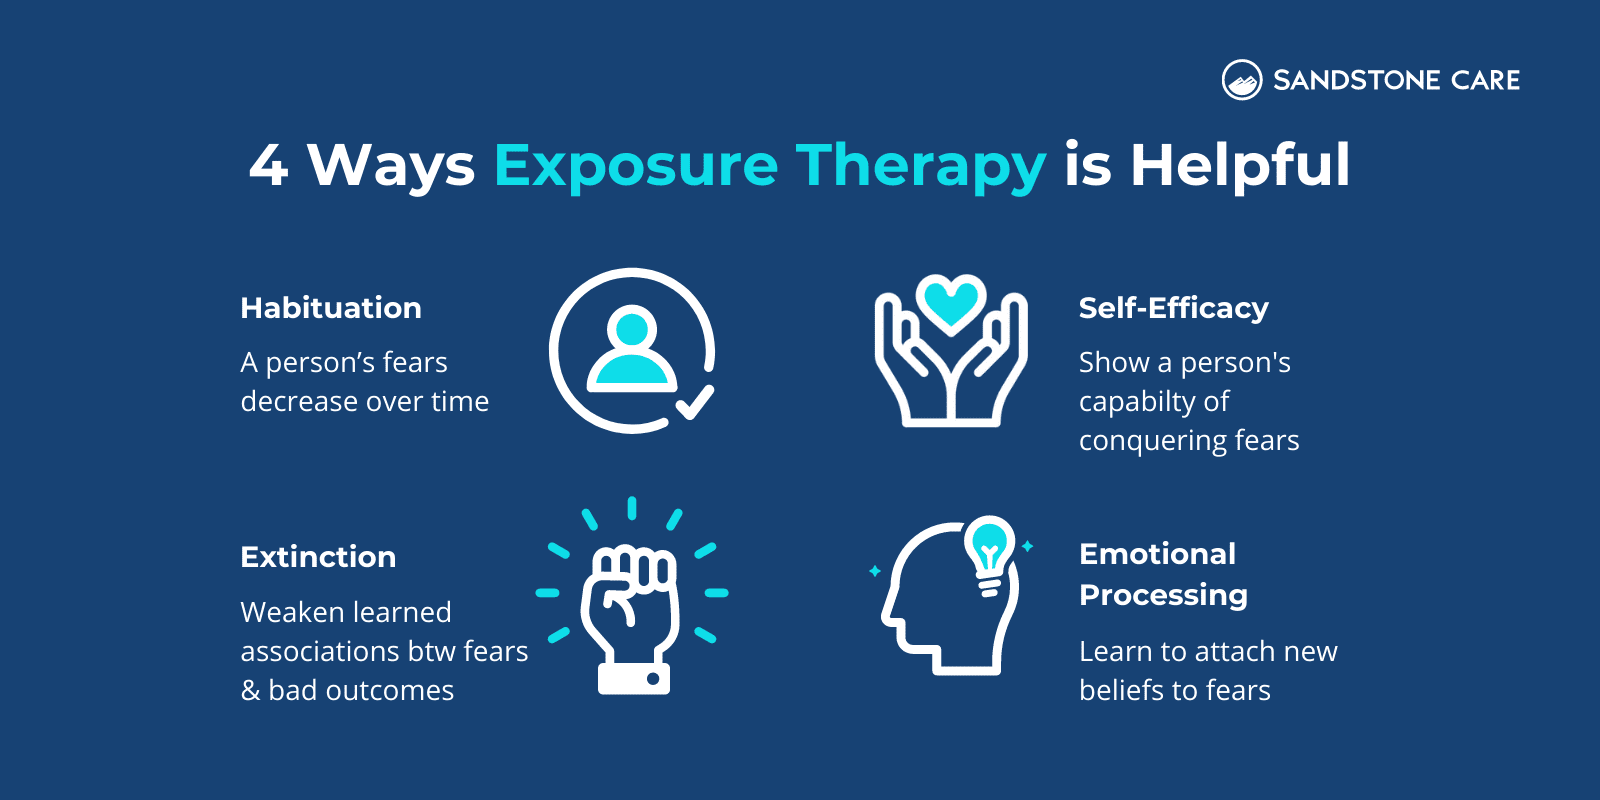 4 ways exposure therapy is helpful illustrated with relevant icons and explanations